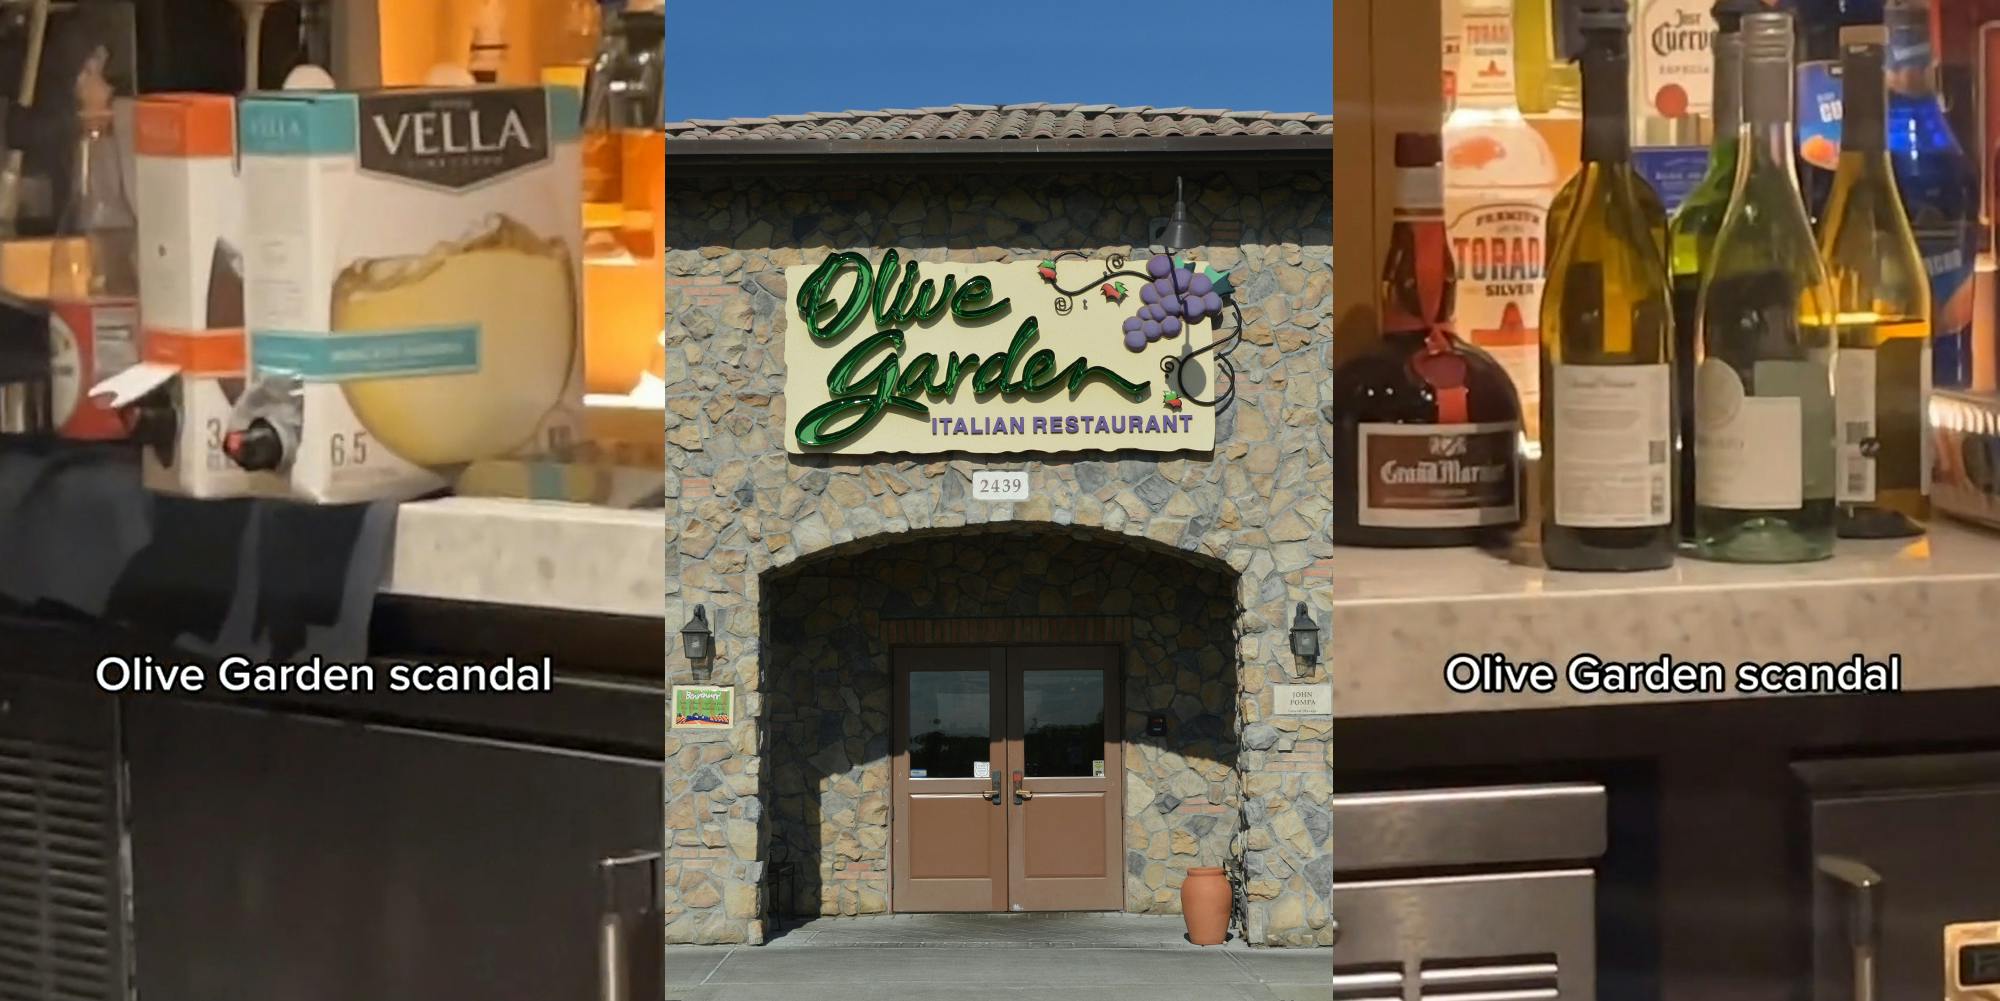 Olive Garden interior with boxed wine and caption "Olive Garden scandal" (l) Olive Garden building with sign and blue sky (c) Olive Garden interior with wine and caption "Olive Garden scandal" (r)